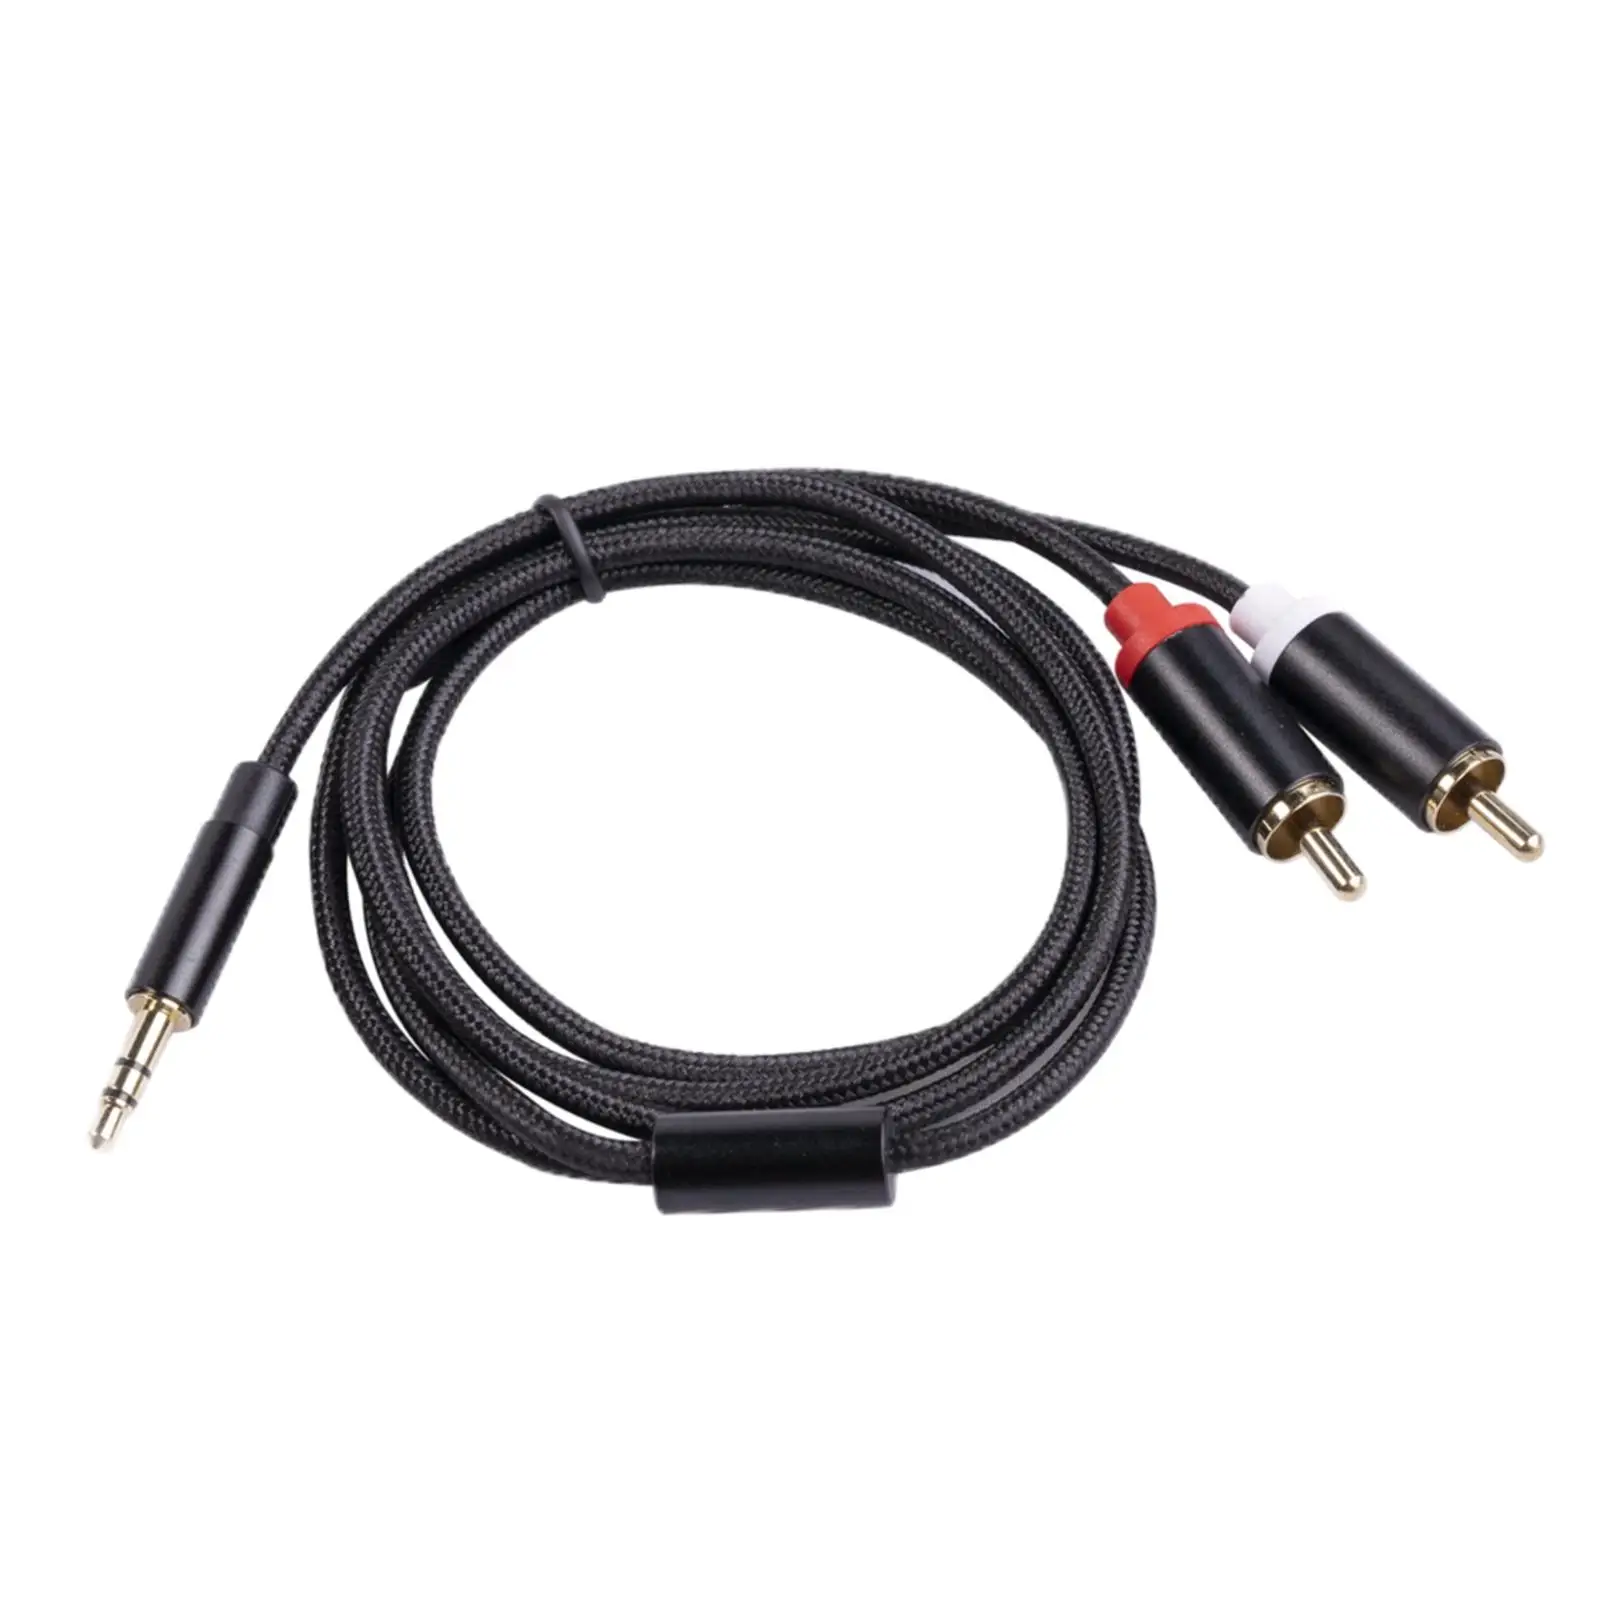 Audio Cable 1/1.8/3M Length 3.5mm Jack Male MP 3 Player Extender Mic RCA Cable Splitter Audio for Notebook Audio Line Cord Home